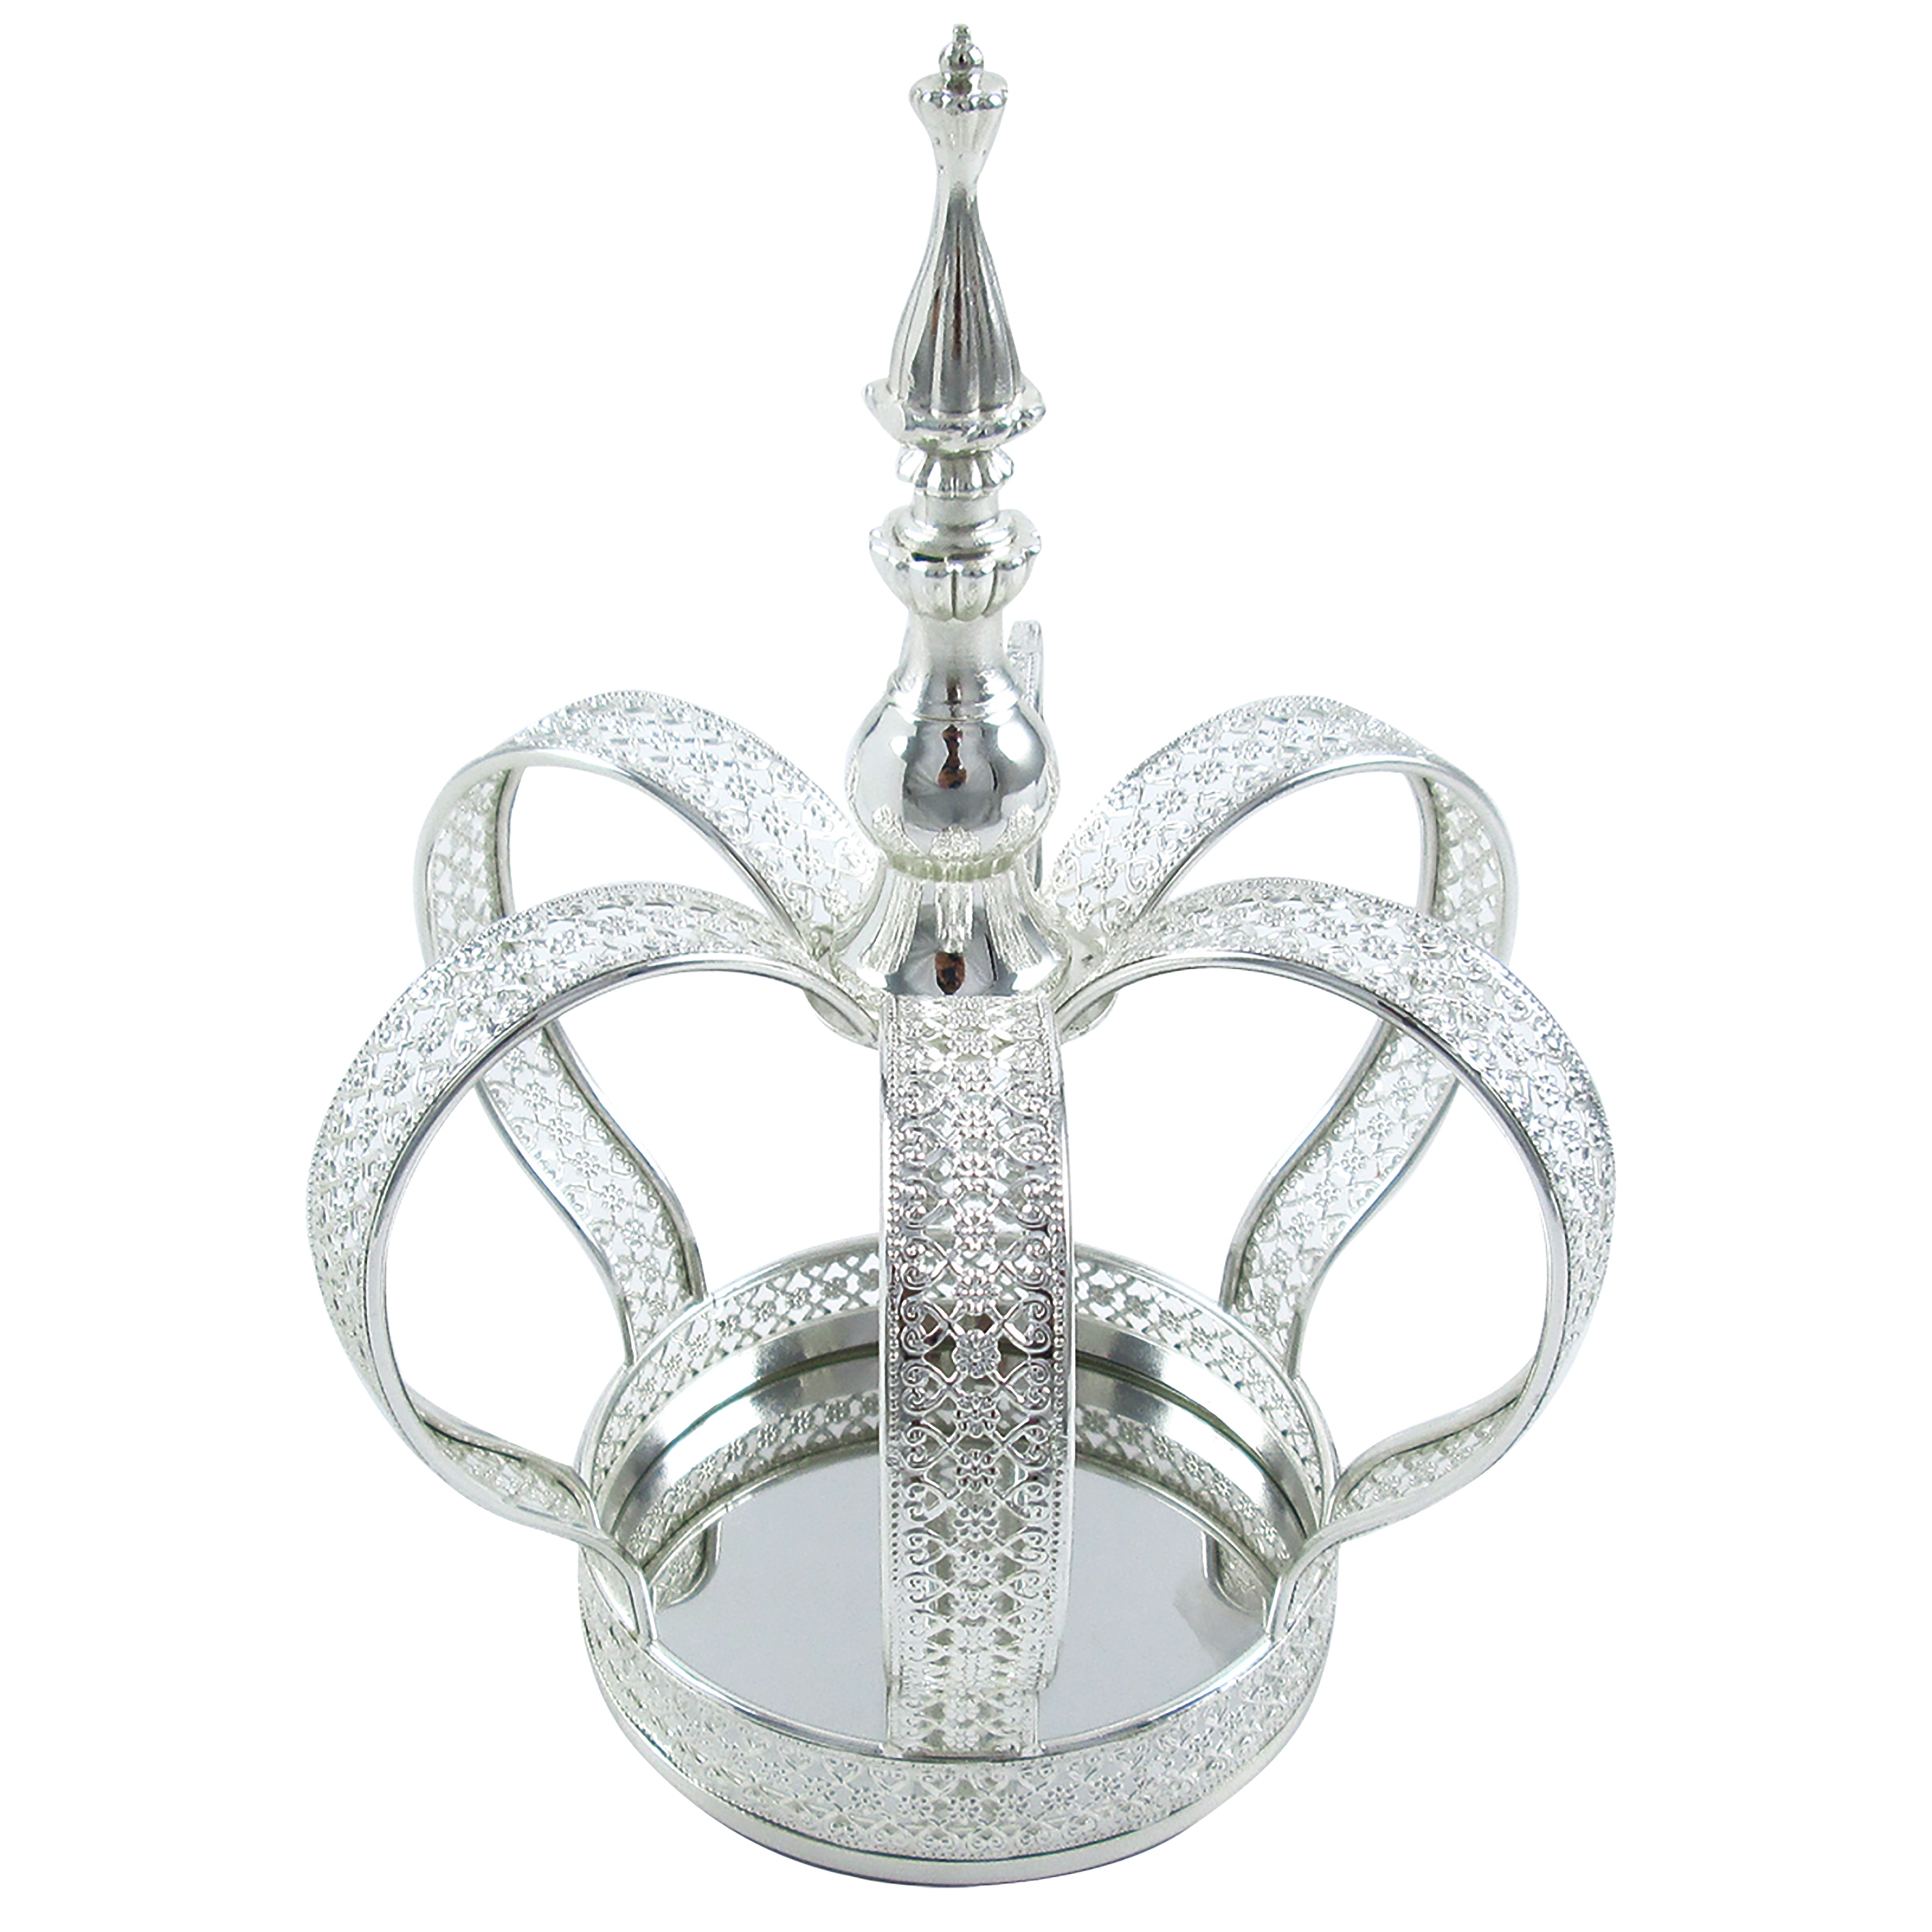 Royal Metal Crown Decor Centerpiece Accent Piece Tabletop with Mirror - Bed  Bath & Beyond - 32178749